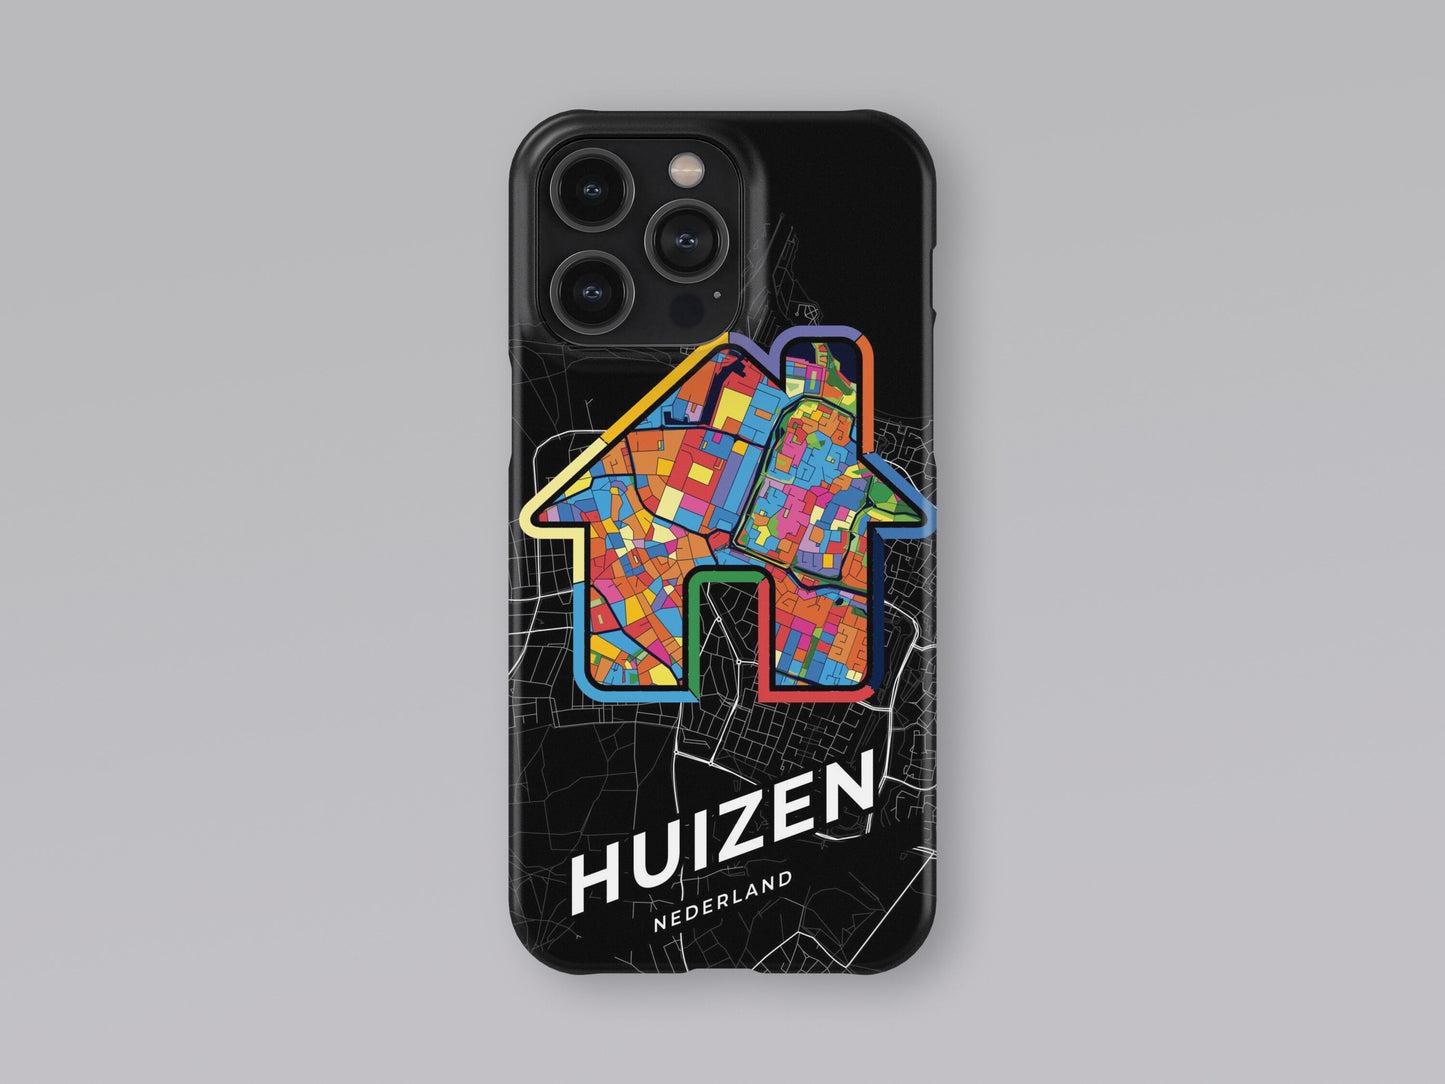 Huizen Netherlands slim phone case with colorful icon. Birthday, wedding or housewarming gift. Couple match cases. 3